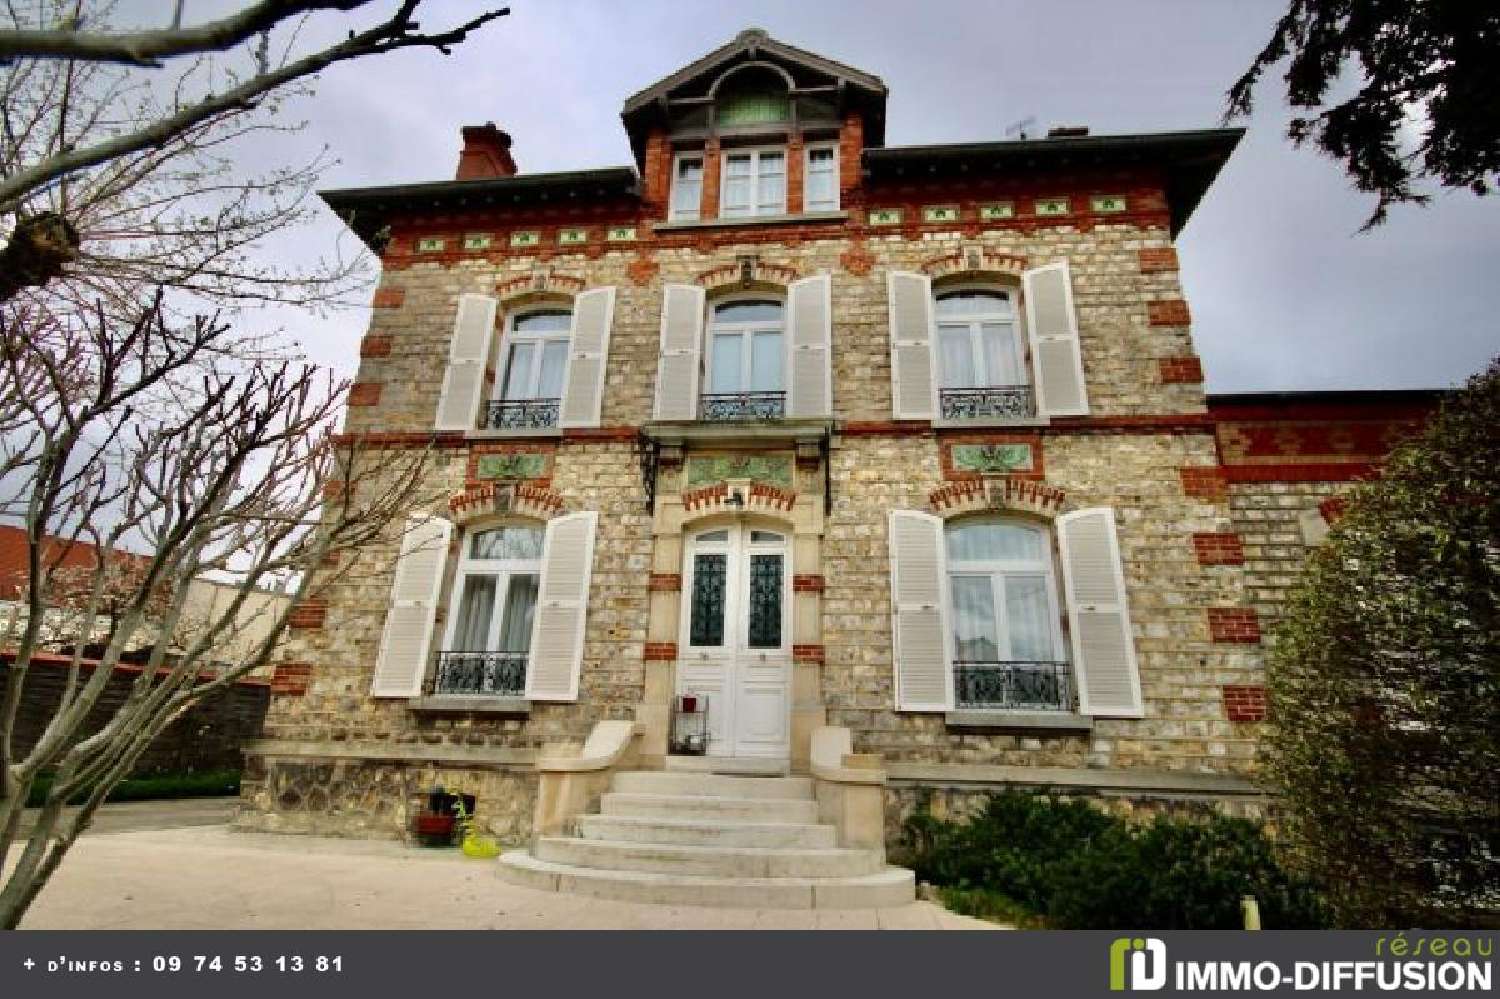  for sale house Montmagny Val-d'Oise 1